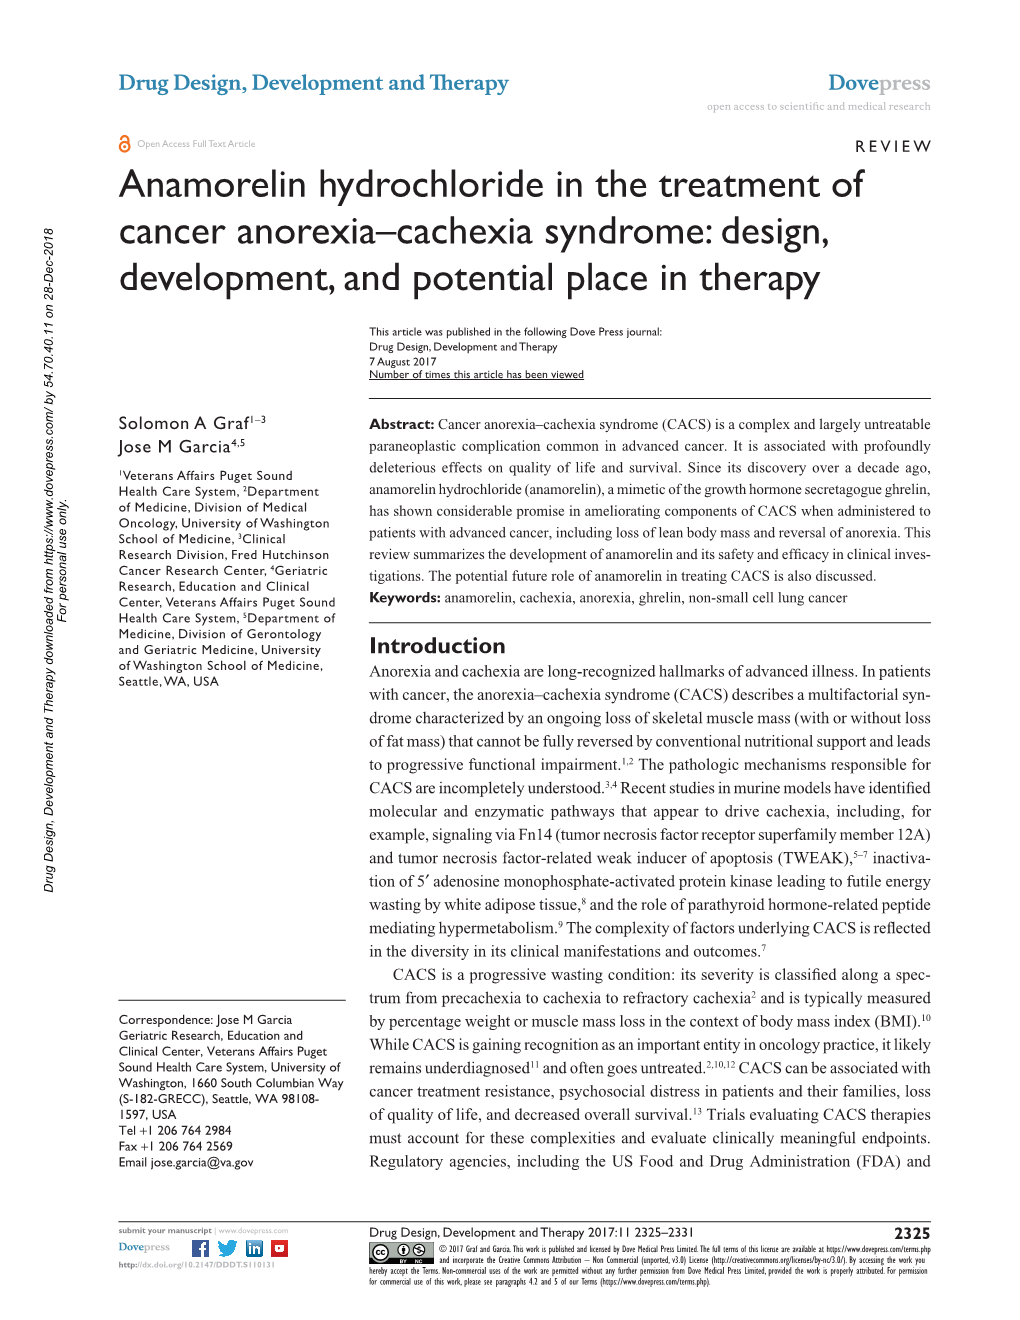 Anamorelin Hydrochloride in the Treatment of Cancer Anorexia–Cachexia Syndrome: Design, Development, and Potential Place in Therapy